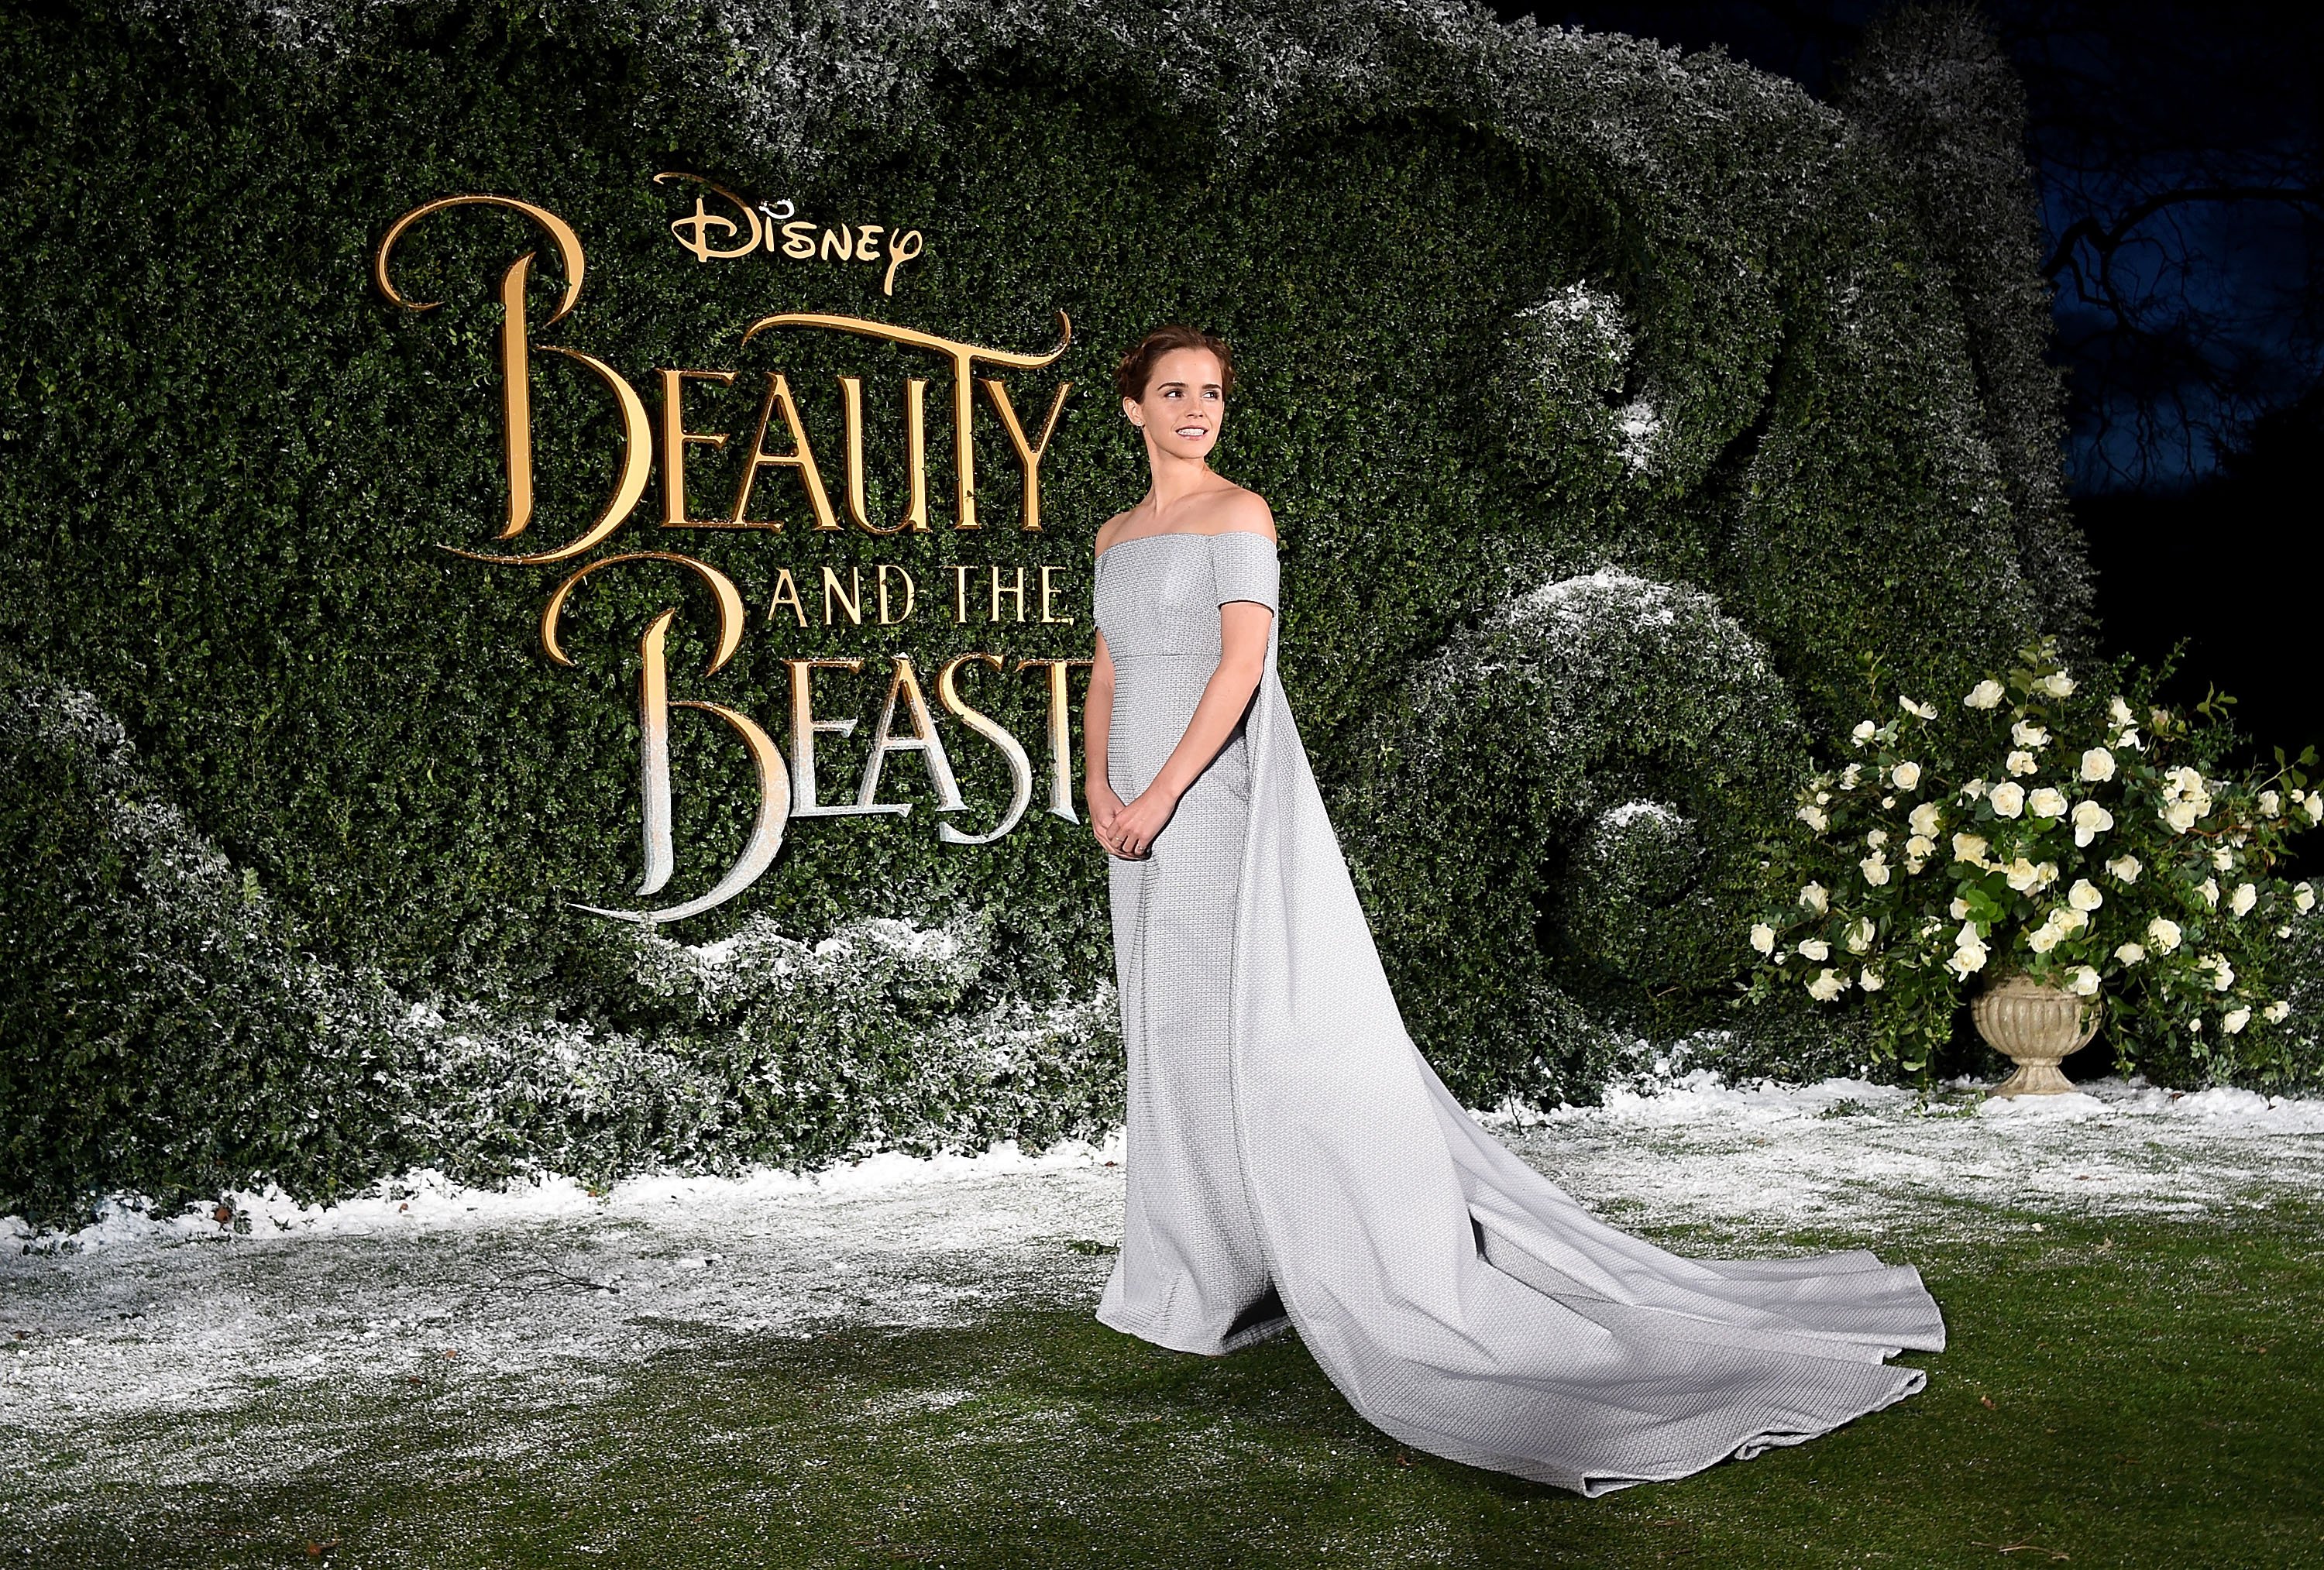 Emma Watson attends UK launch event for Disney's 'Beauty And The Beast'